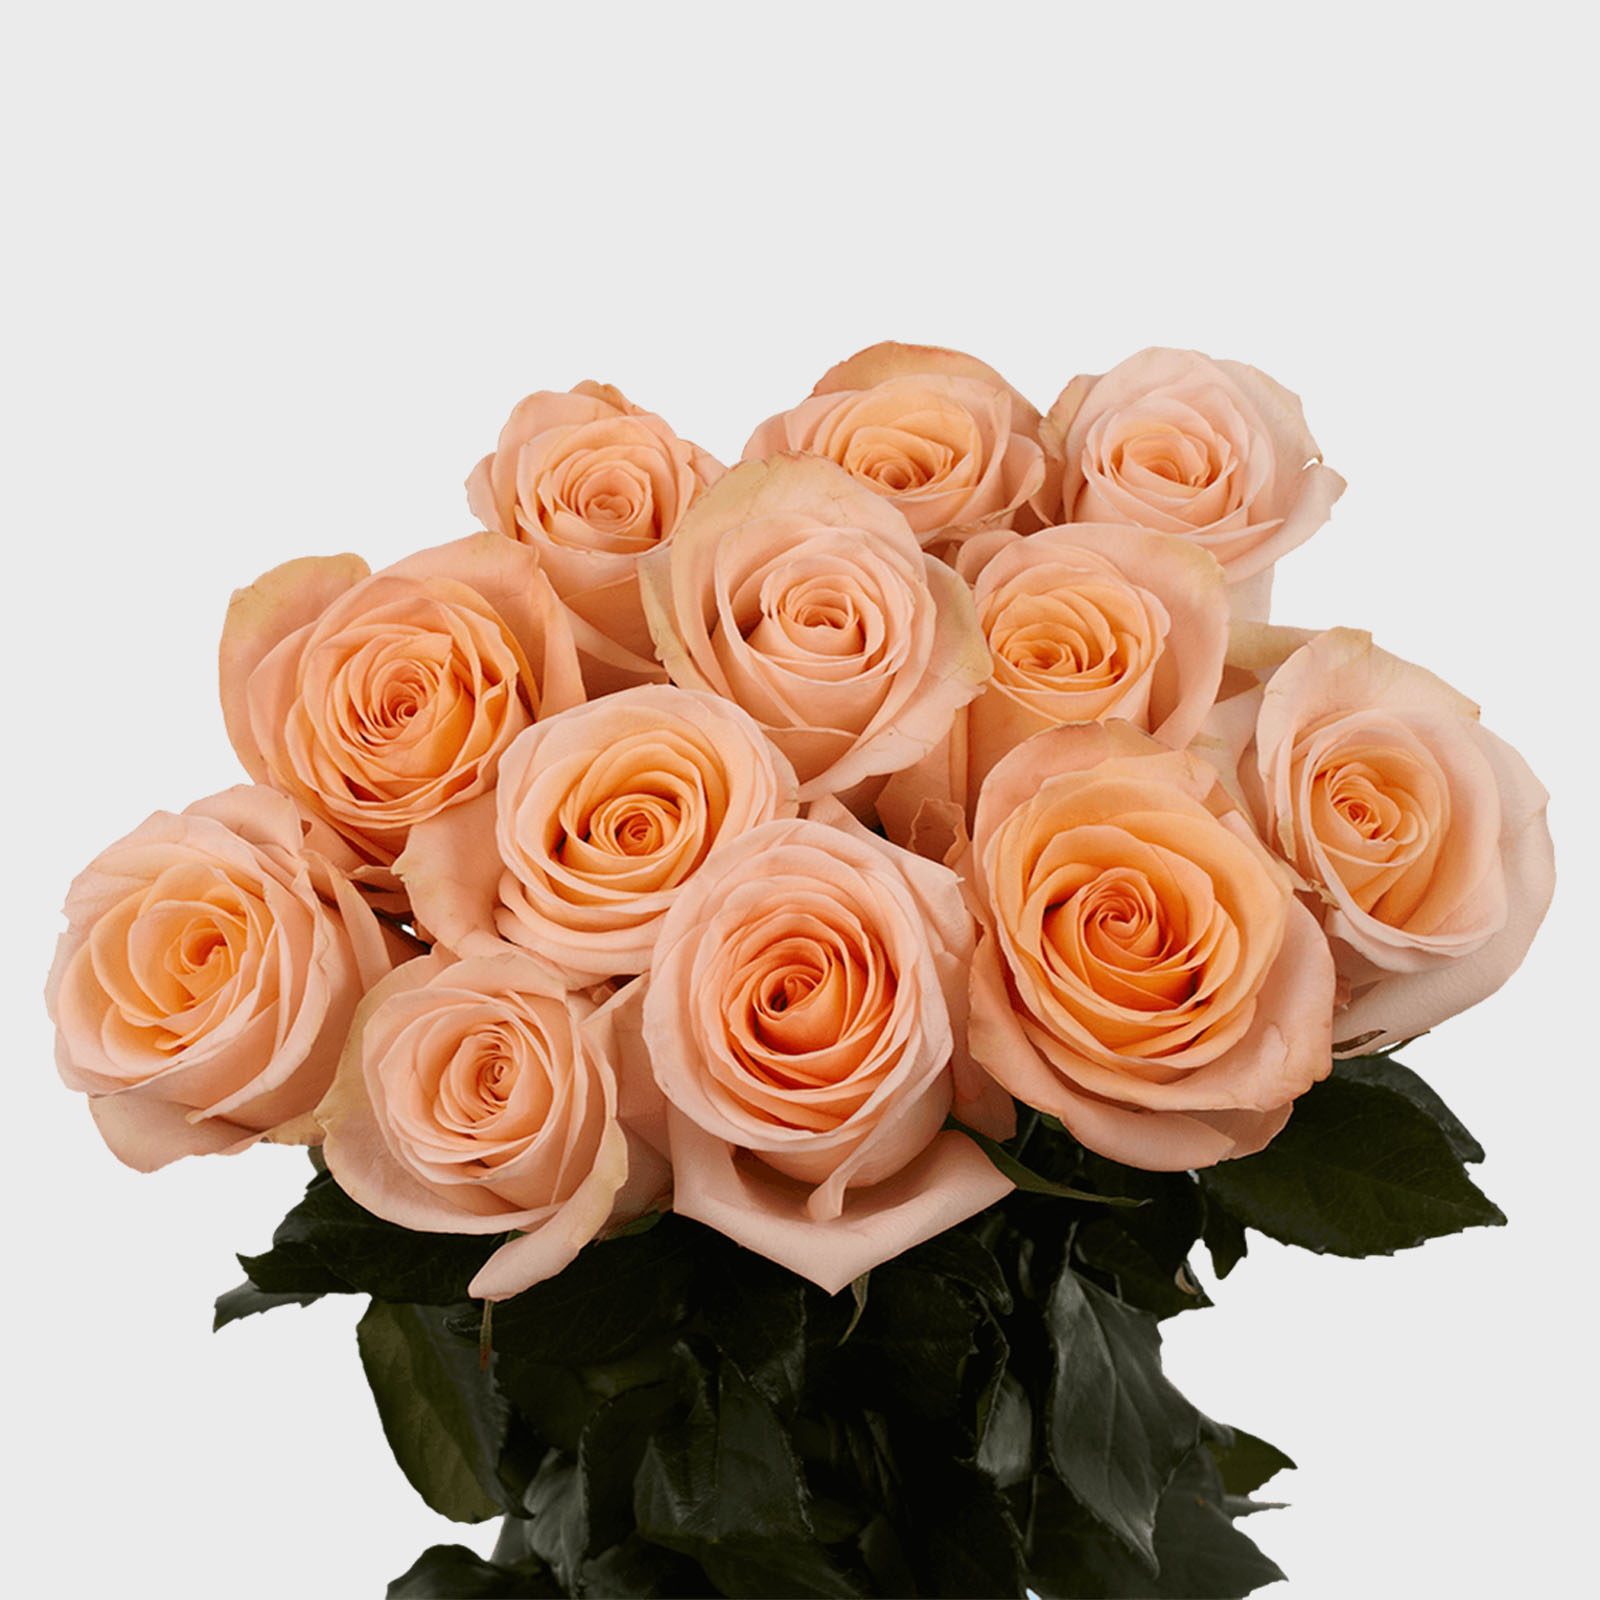 17 Rose Color Meanings to Help You Choose the Perfect Bouquet